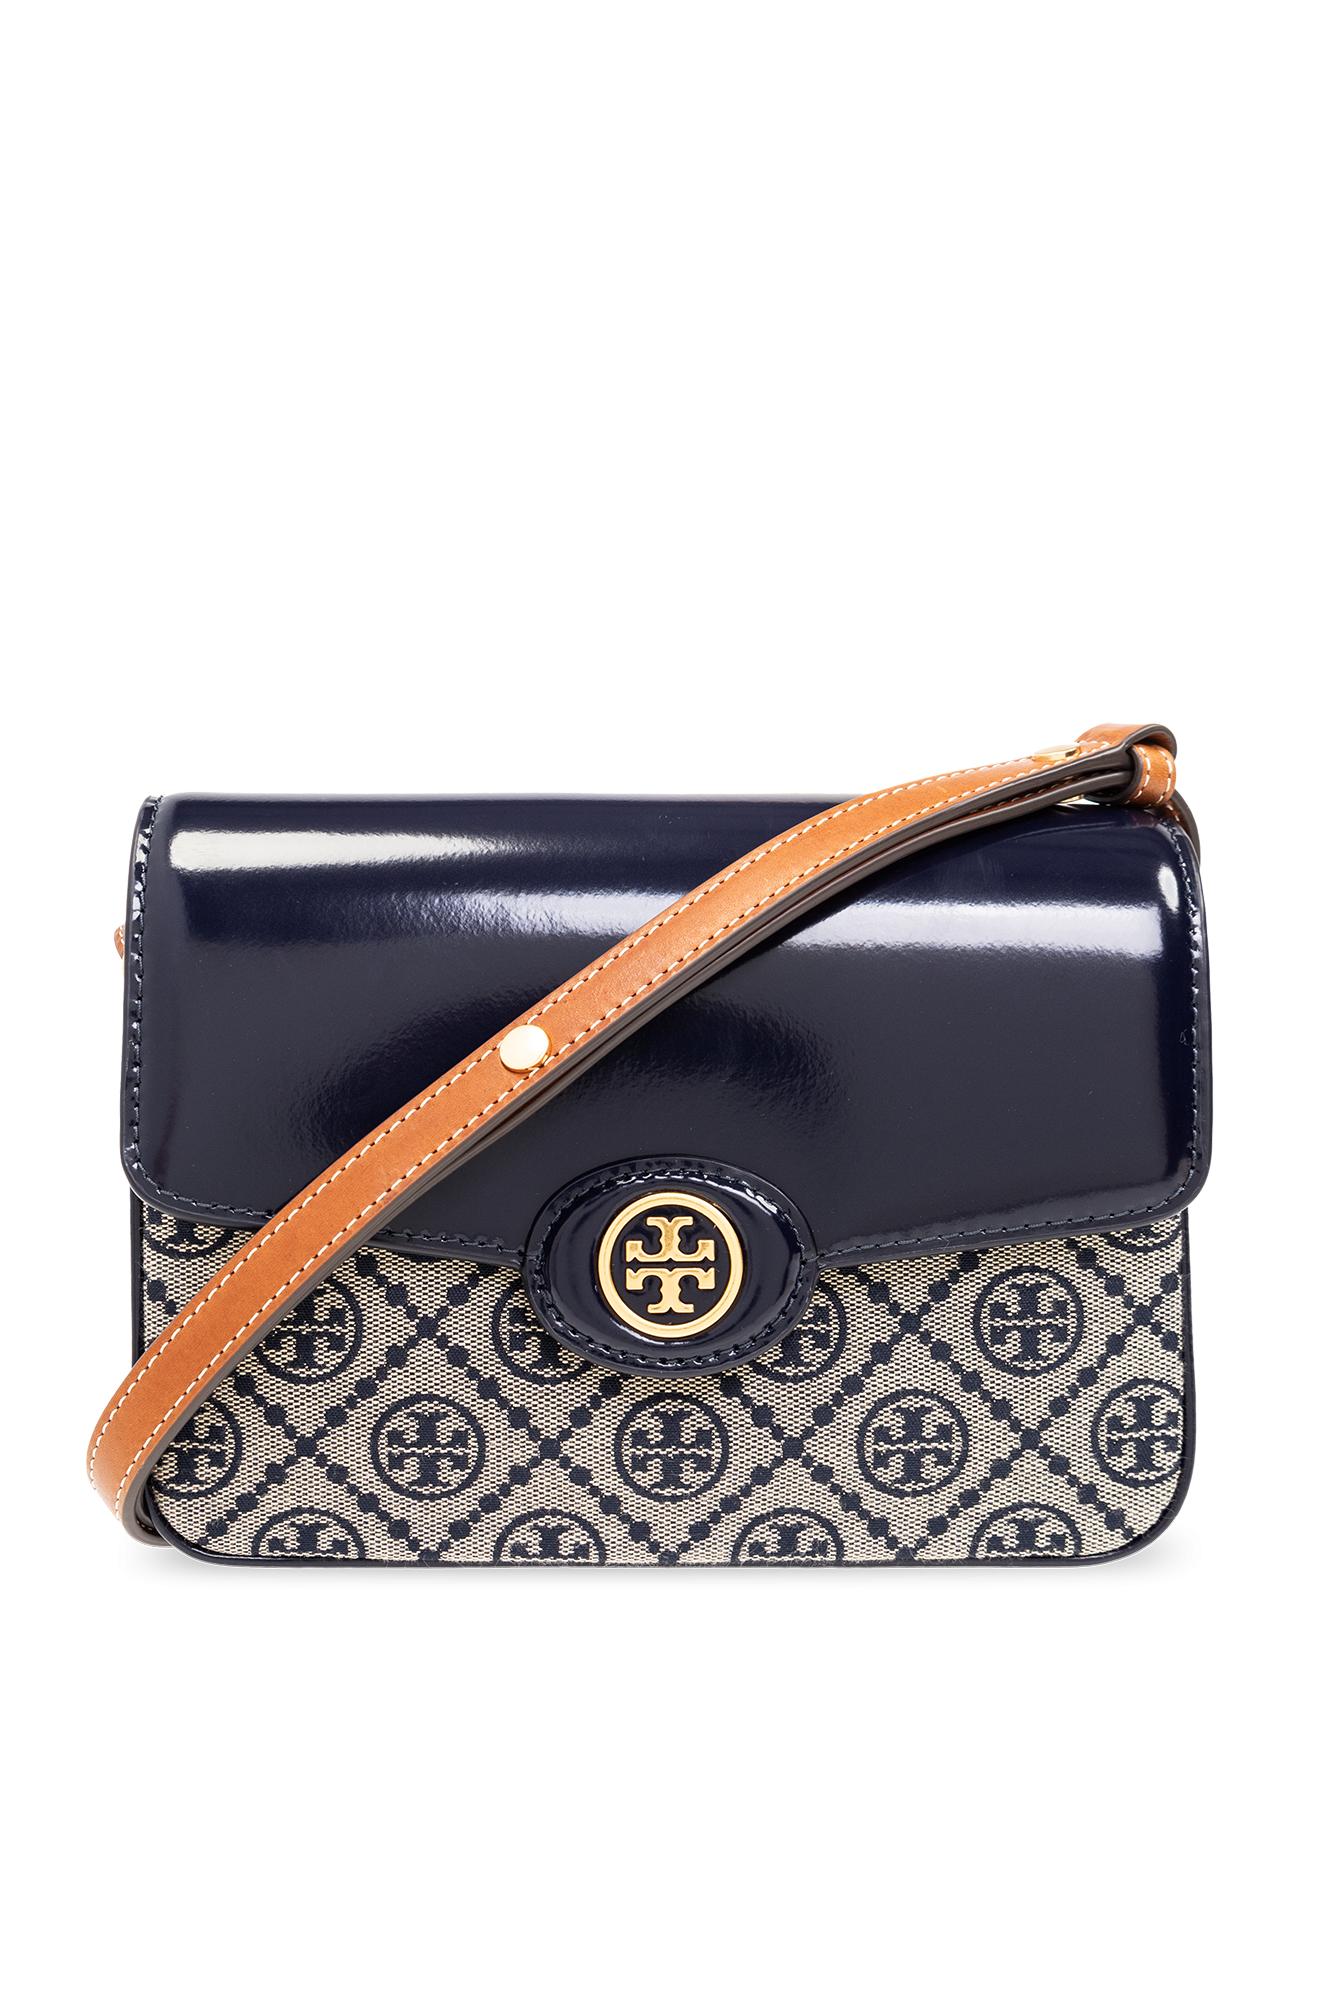 Tory Burch Navy Blue Leather Robinson Double Zip Tote Tory Burch